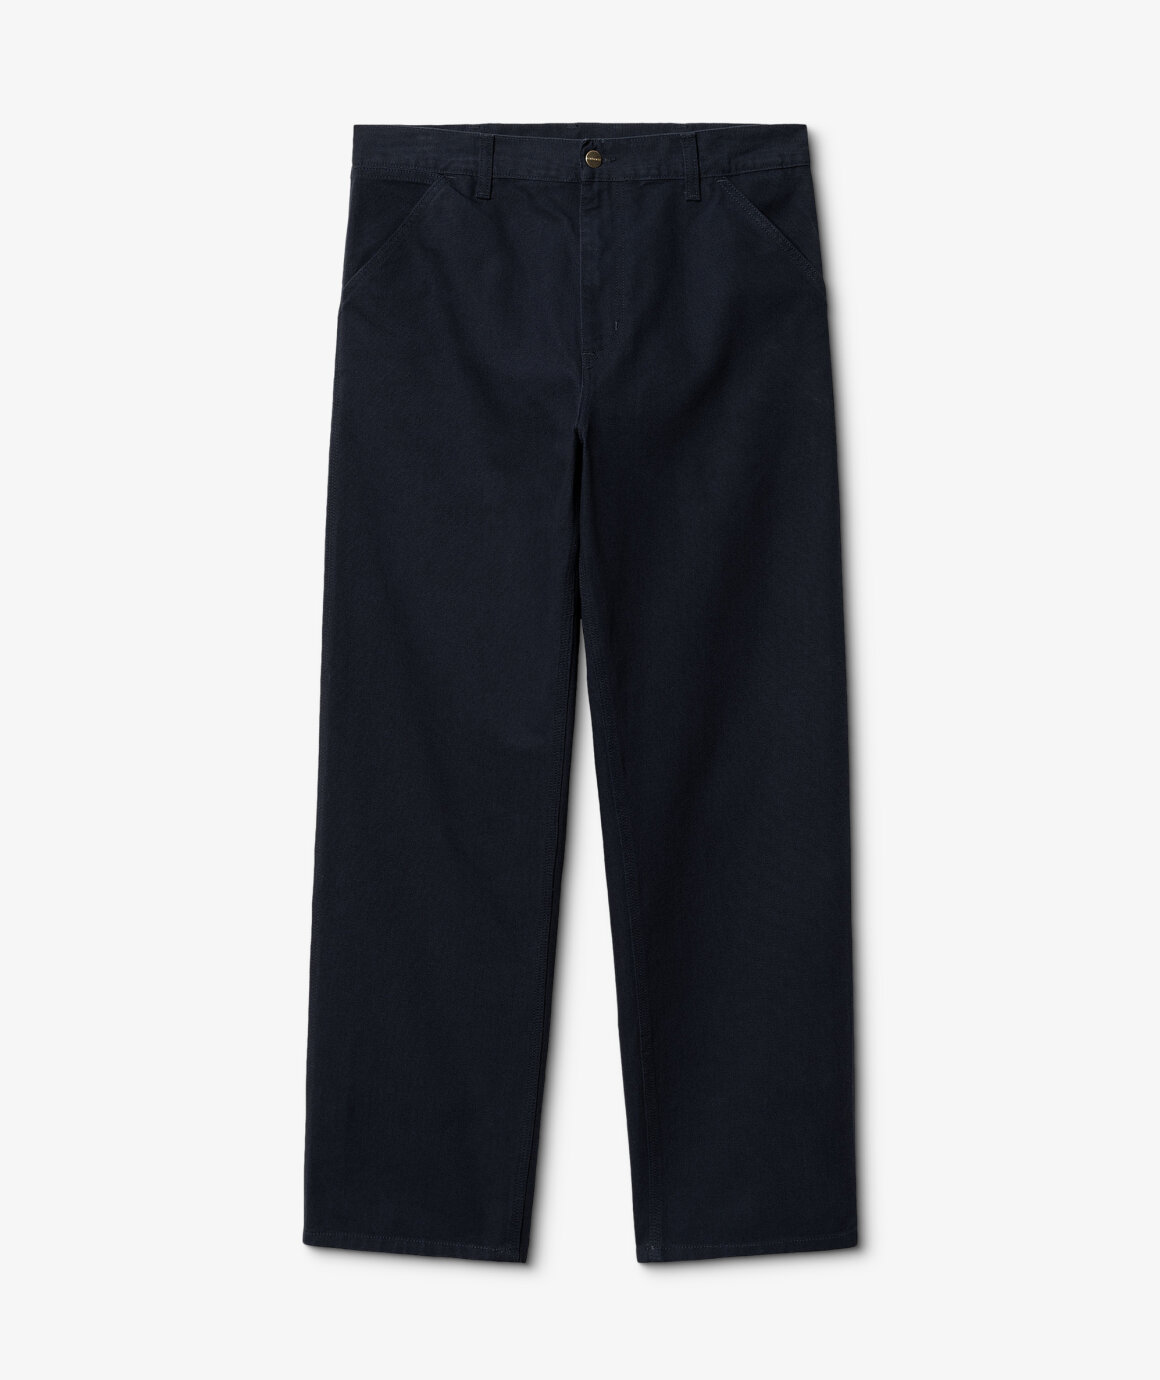 Norse Store | Shipping Worldwide - Carhartt WIP Simple Pant - DARK NAVY ...